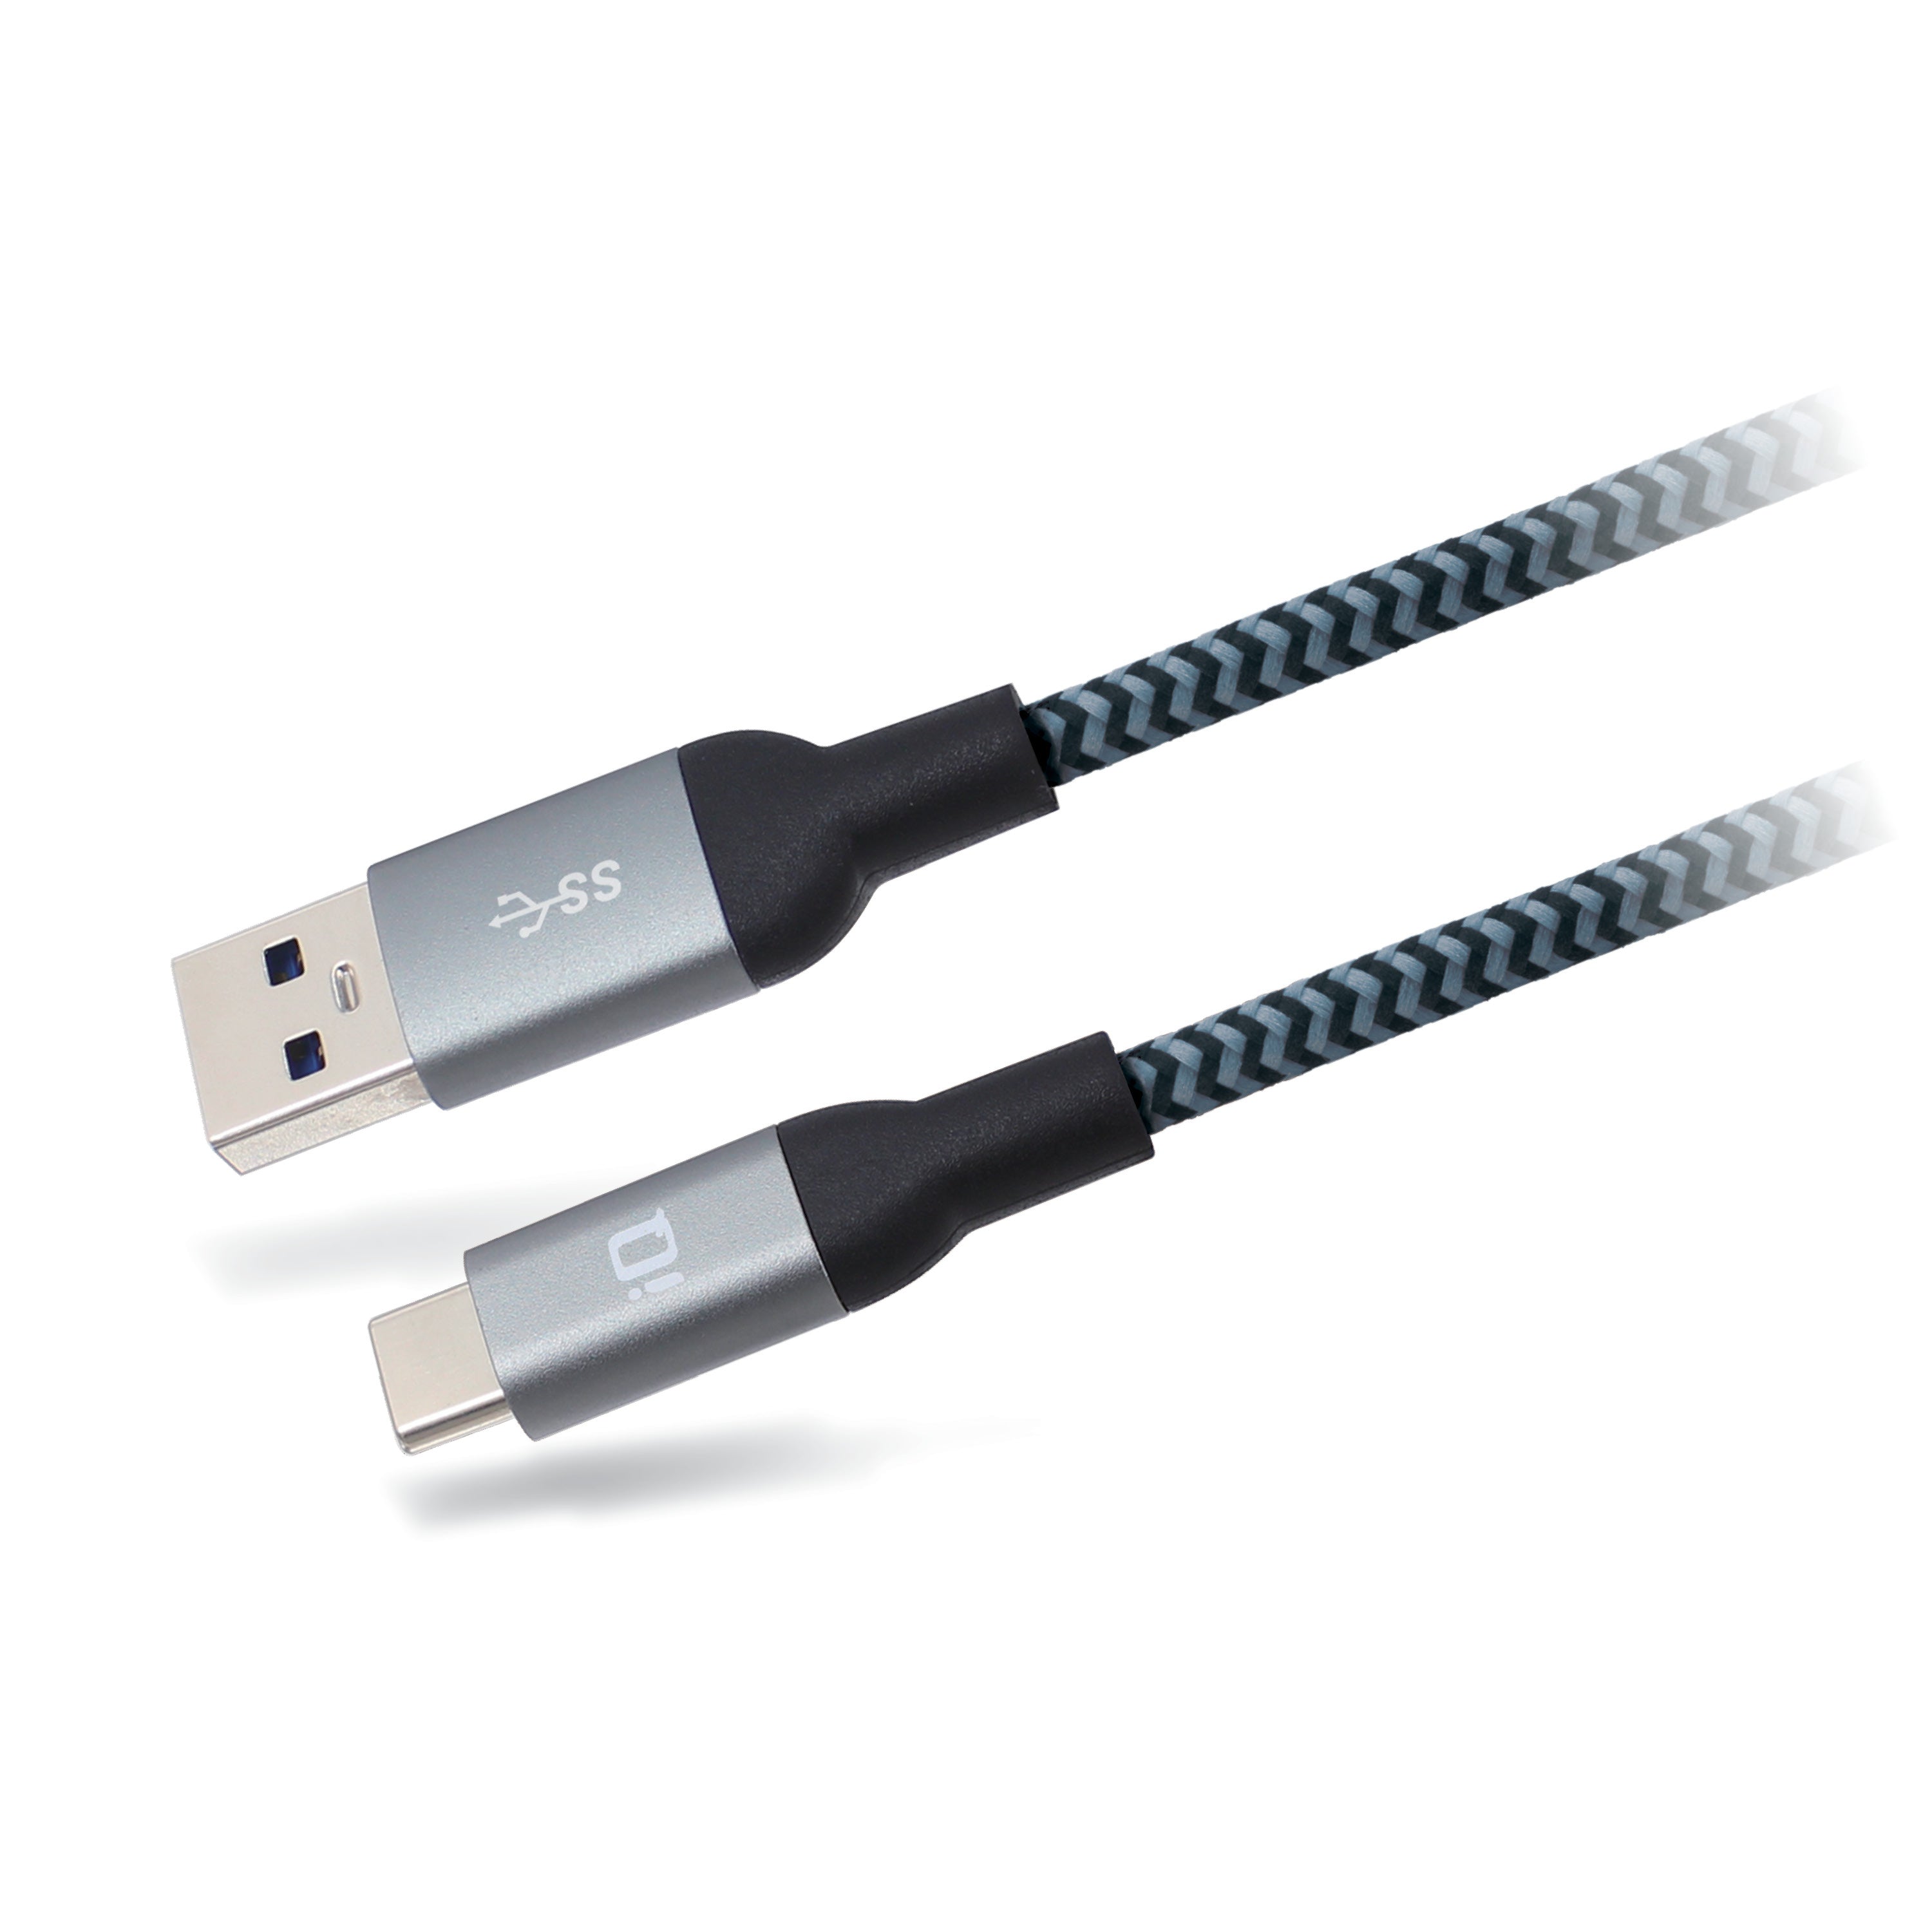 iQ USB Type-C To USB-A Cable Braided 1.5m/5ft